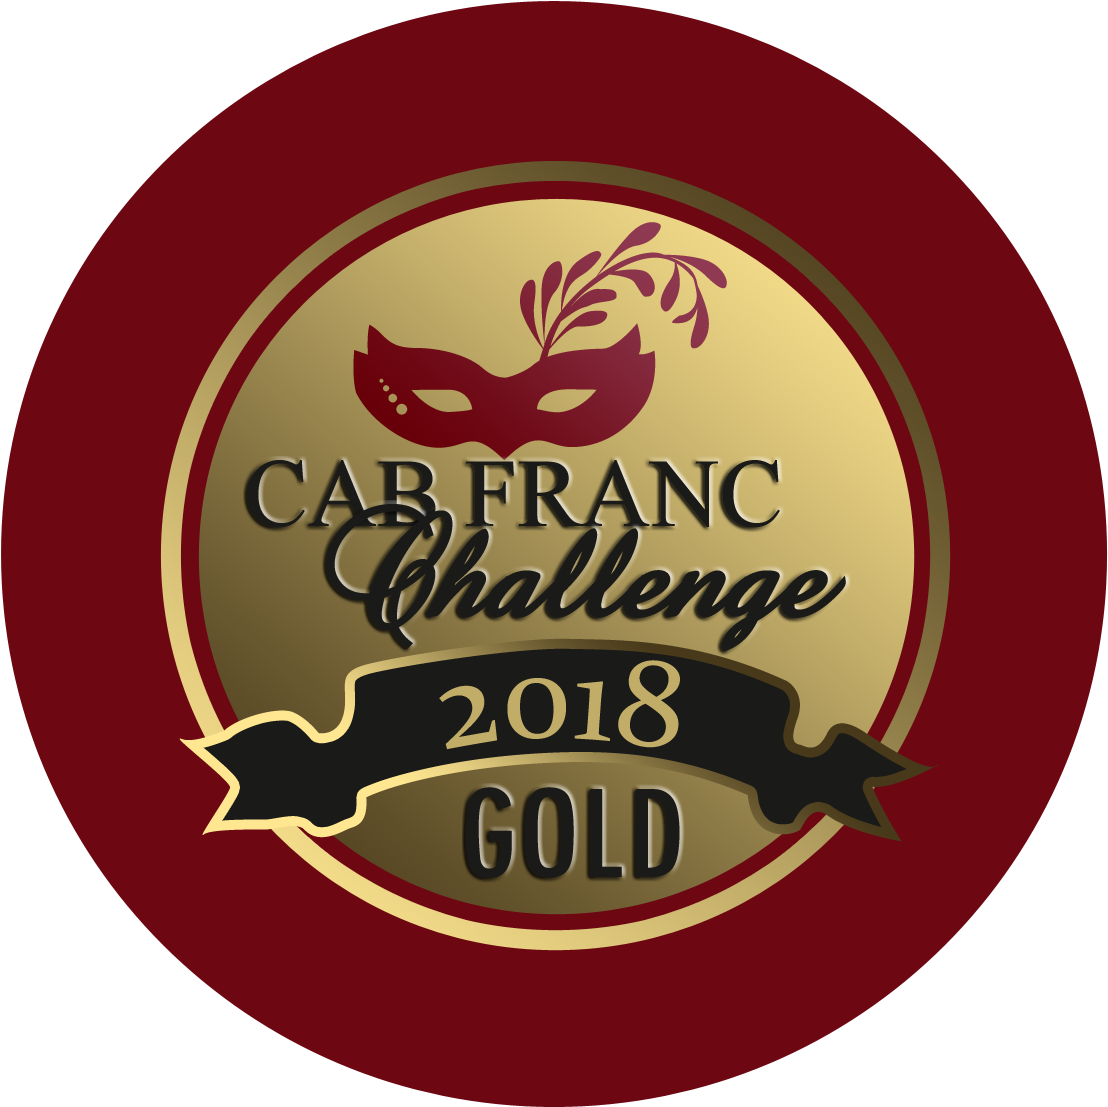 Cab Franc Challenge Offers Excellent Gold Medal Winners - Gold Medal (1181x1181)